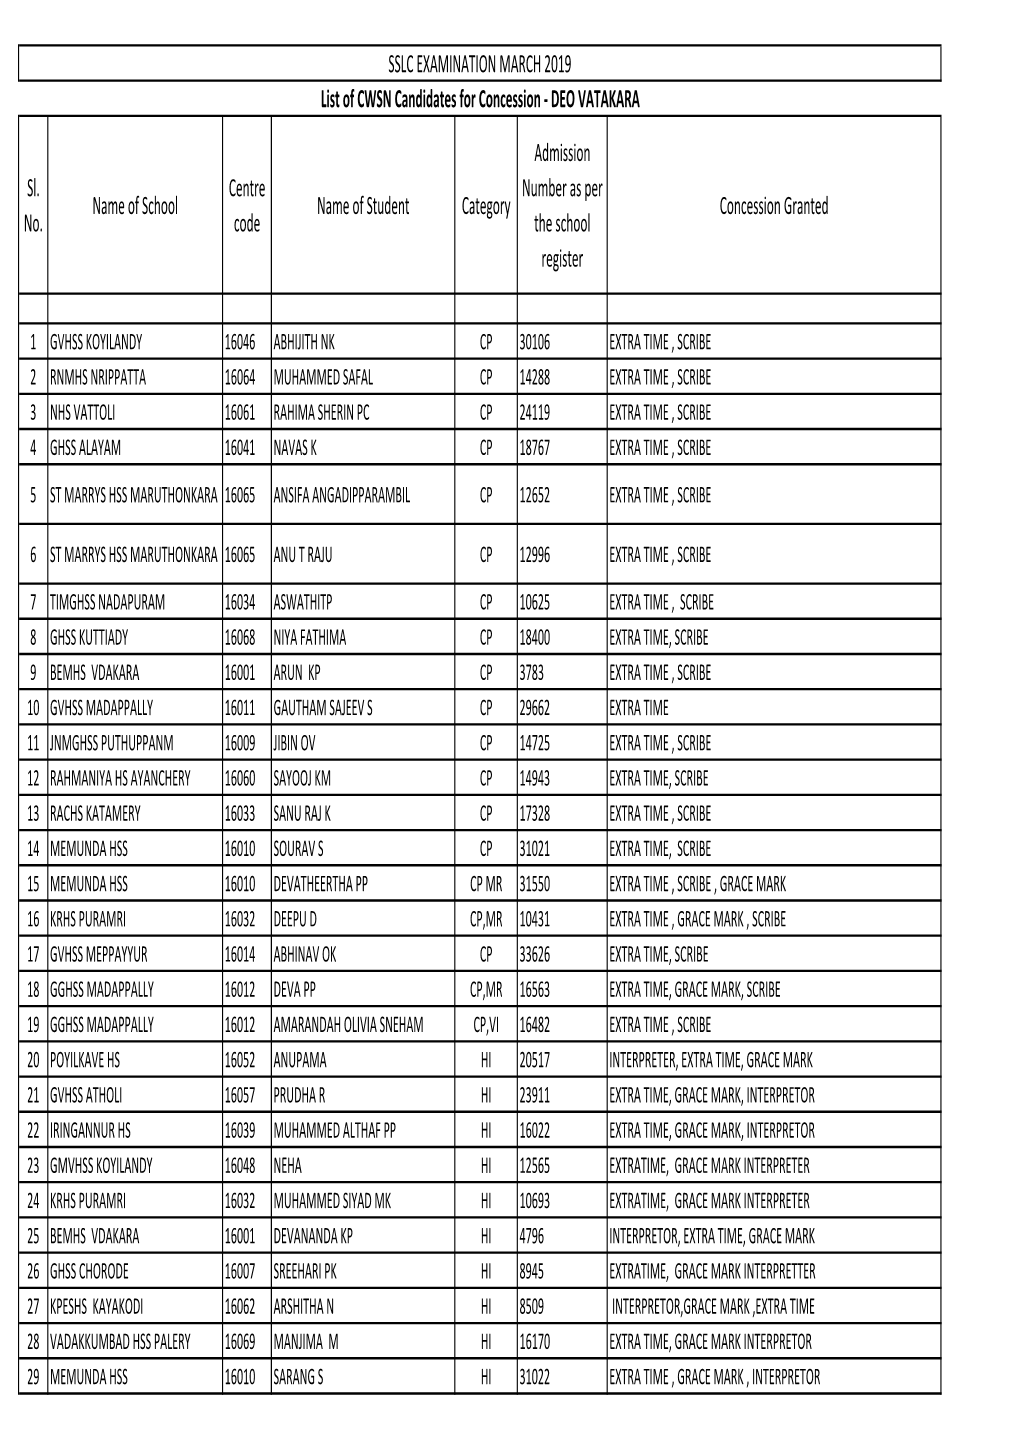 First List for SSLC March 2019 18-01-2019